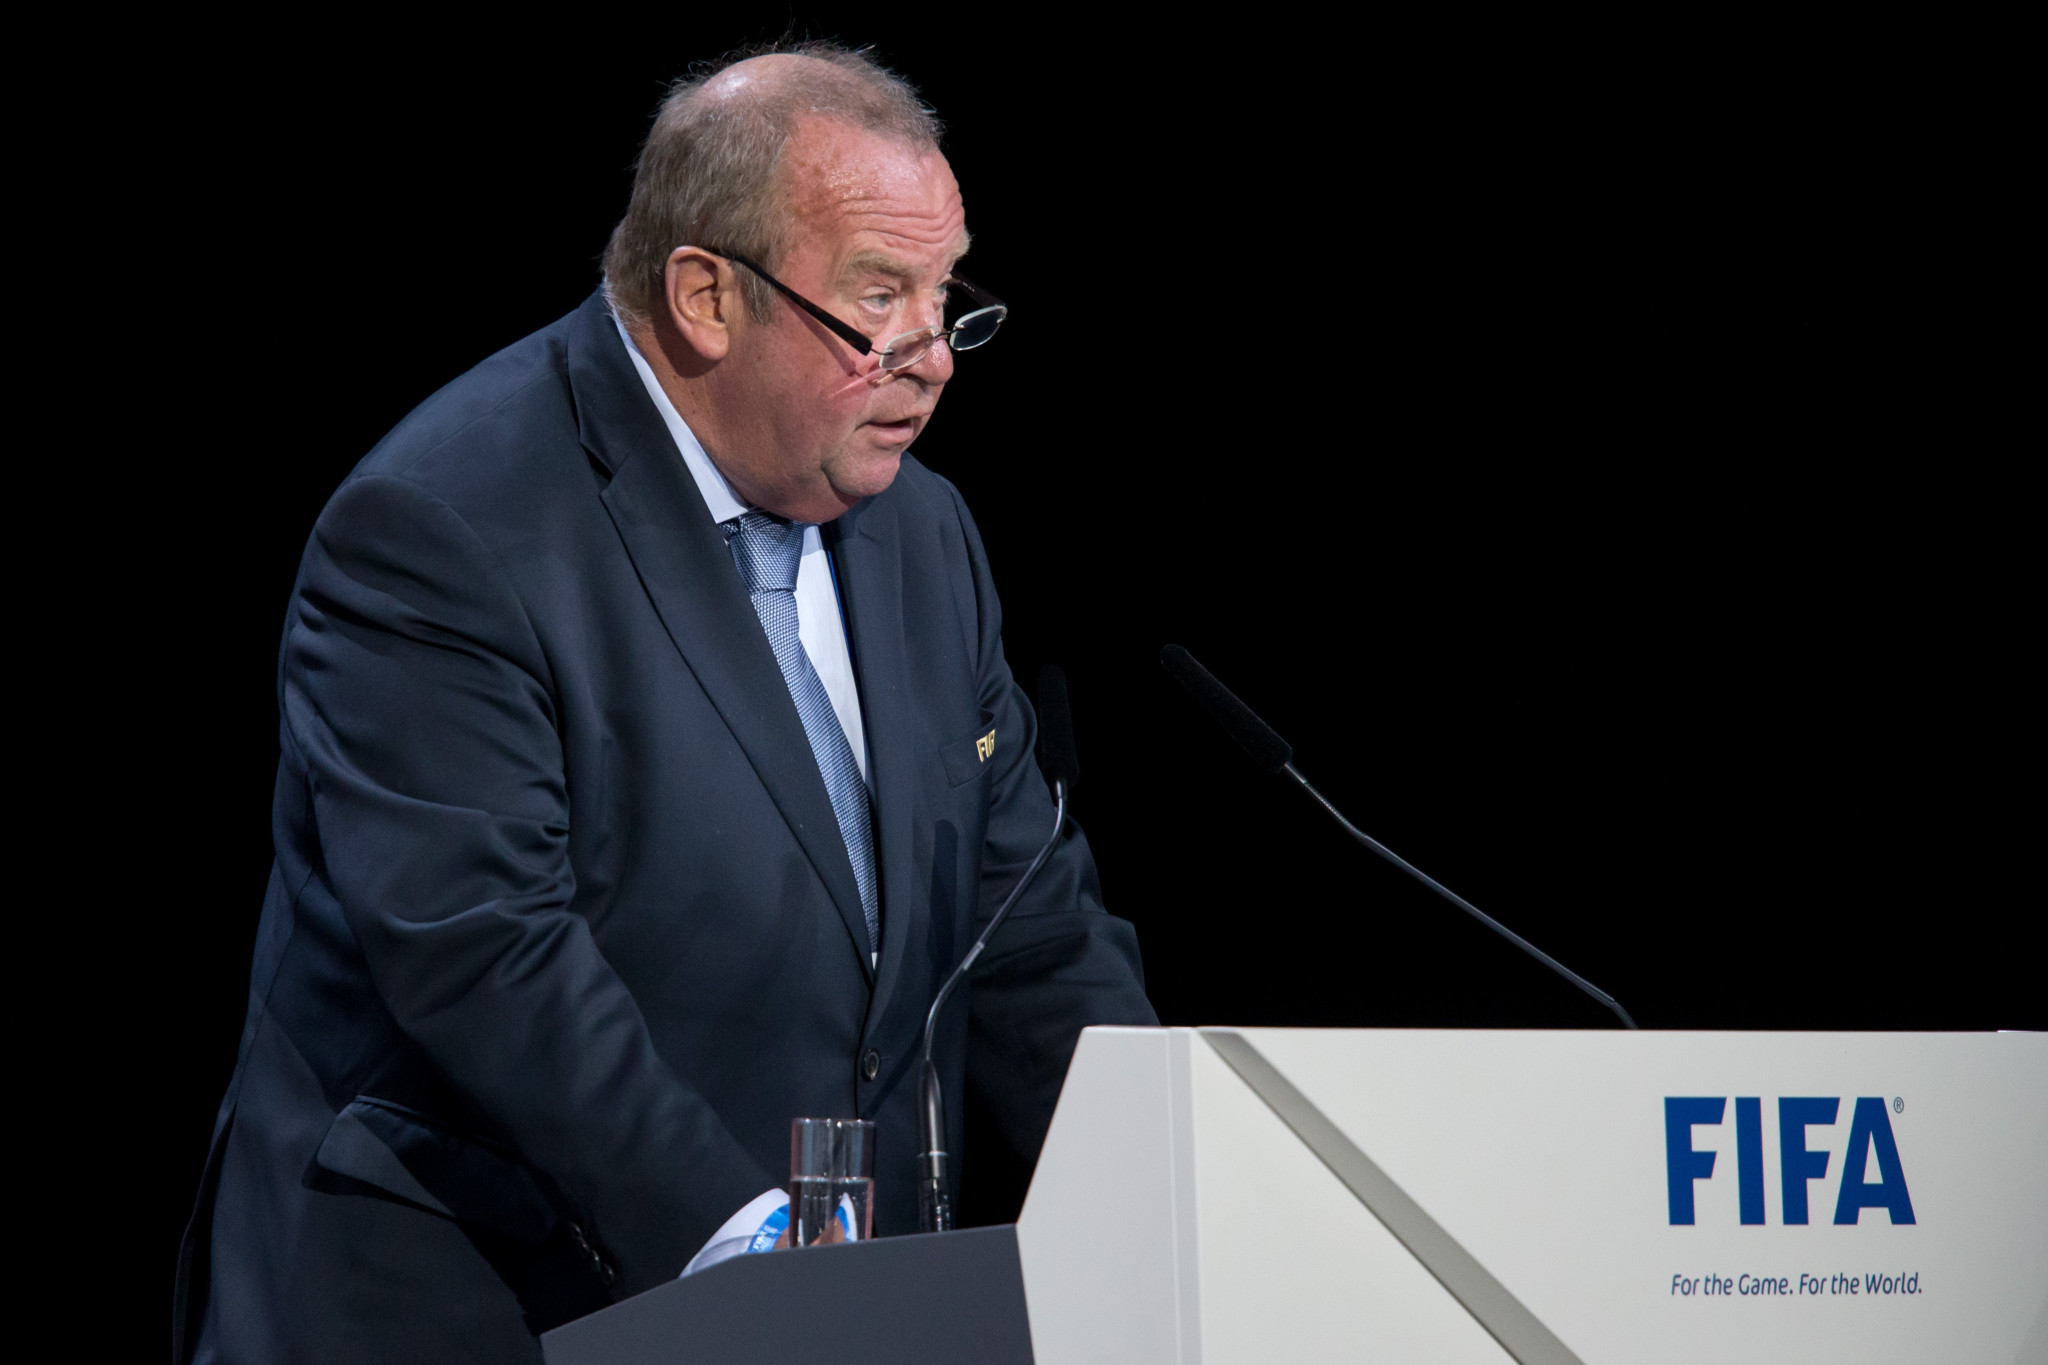 FIFA Medical Committee chairman warns resumption of European leagues in May would be risky